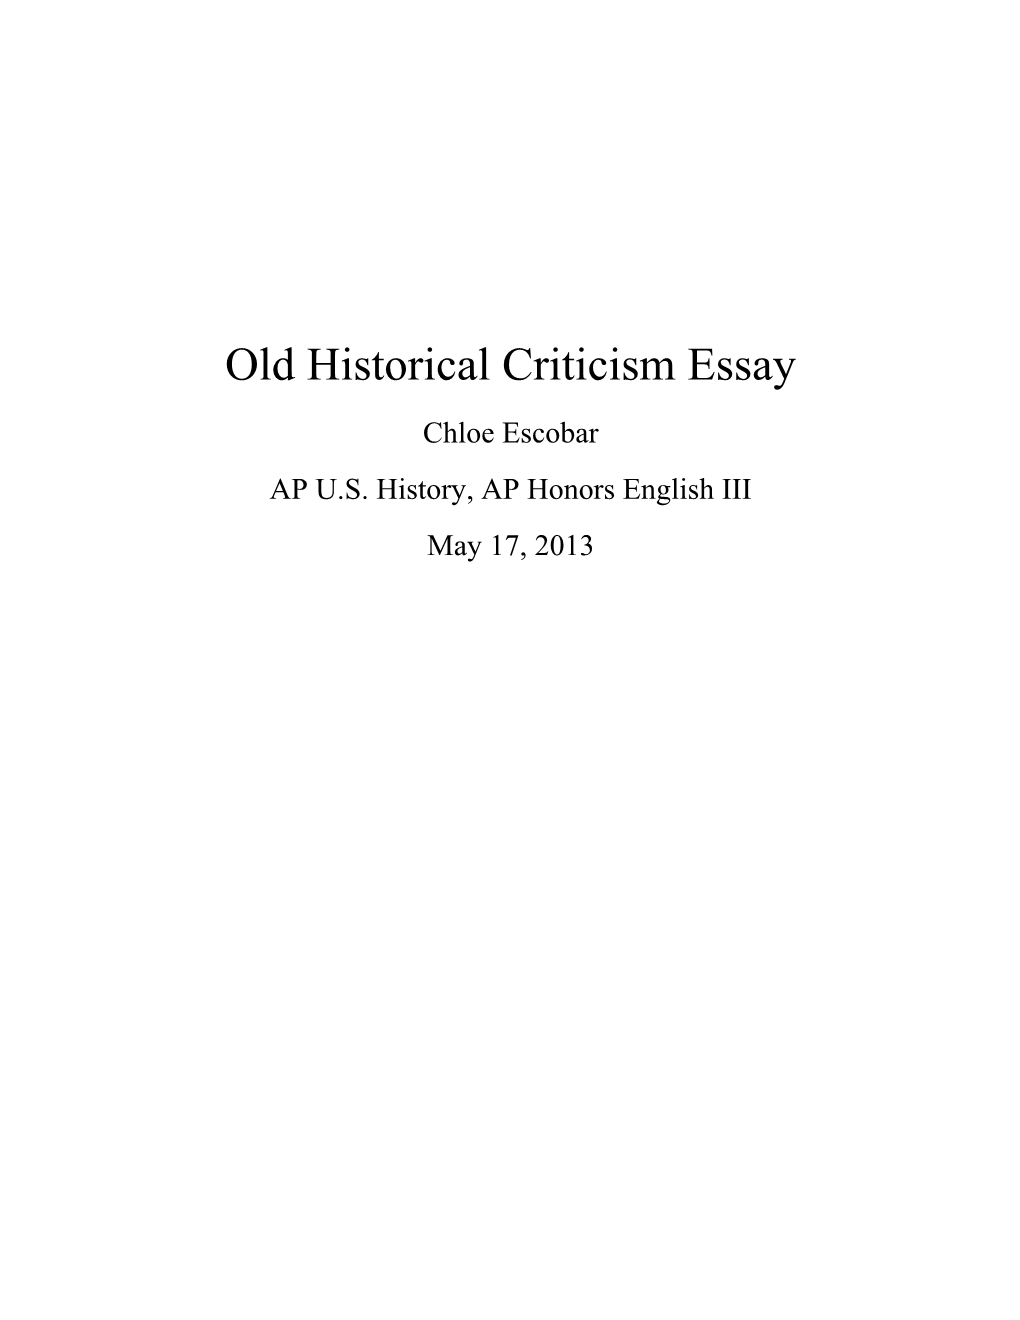 Old Historical Criticism Essay s2